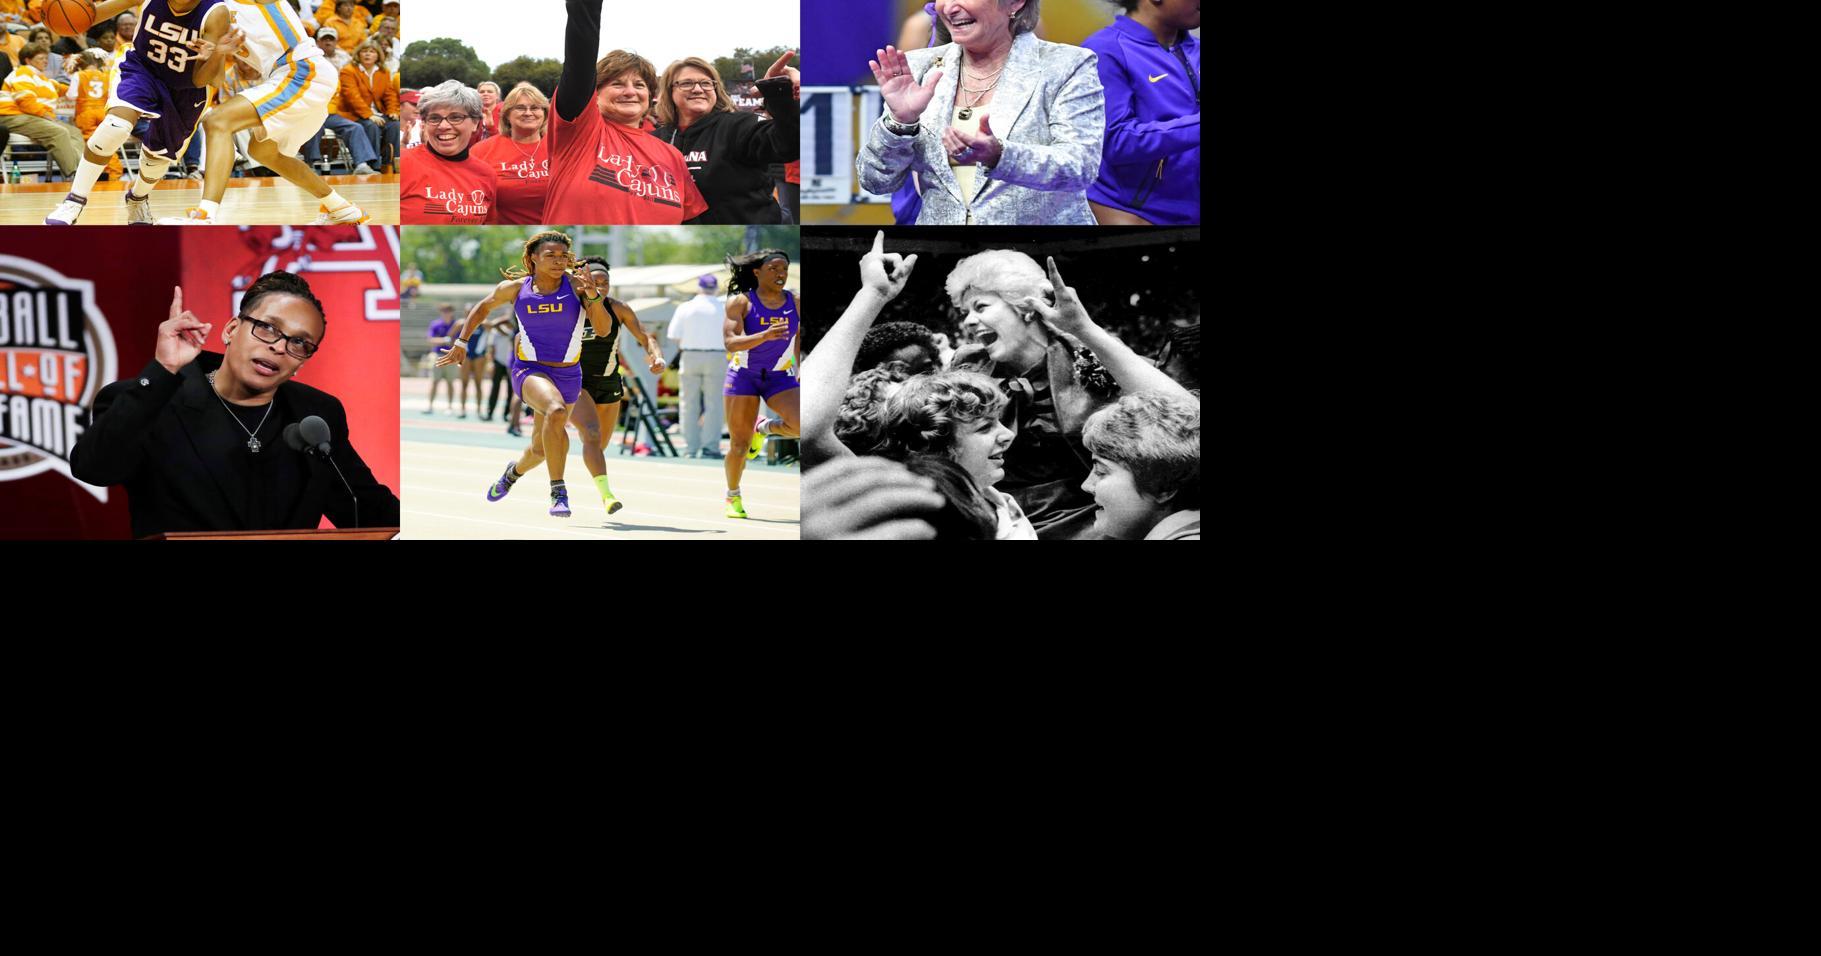 Title IX at 50: Here’s our list of Louisiana’s 25 women of influence in sports